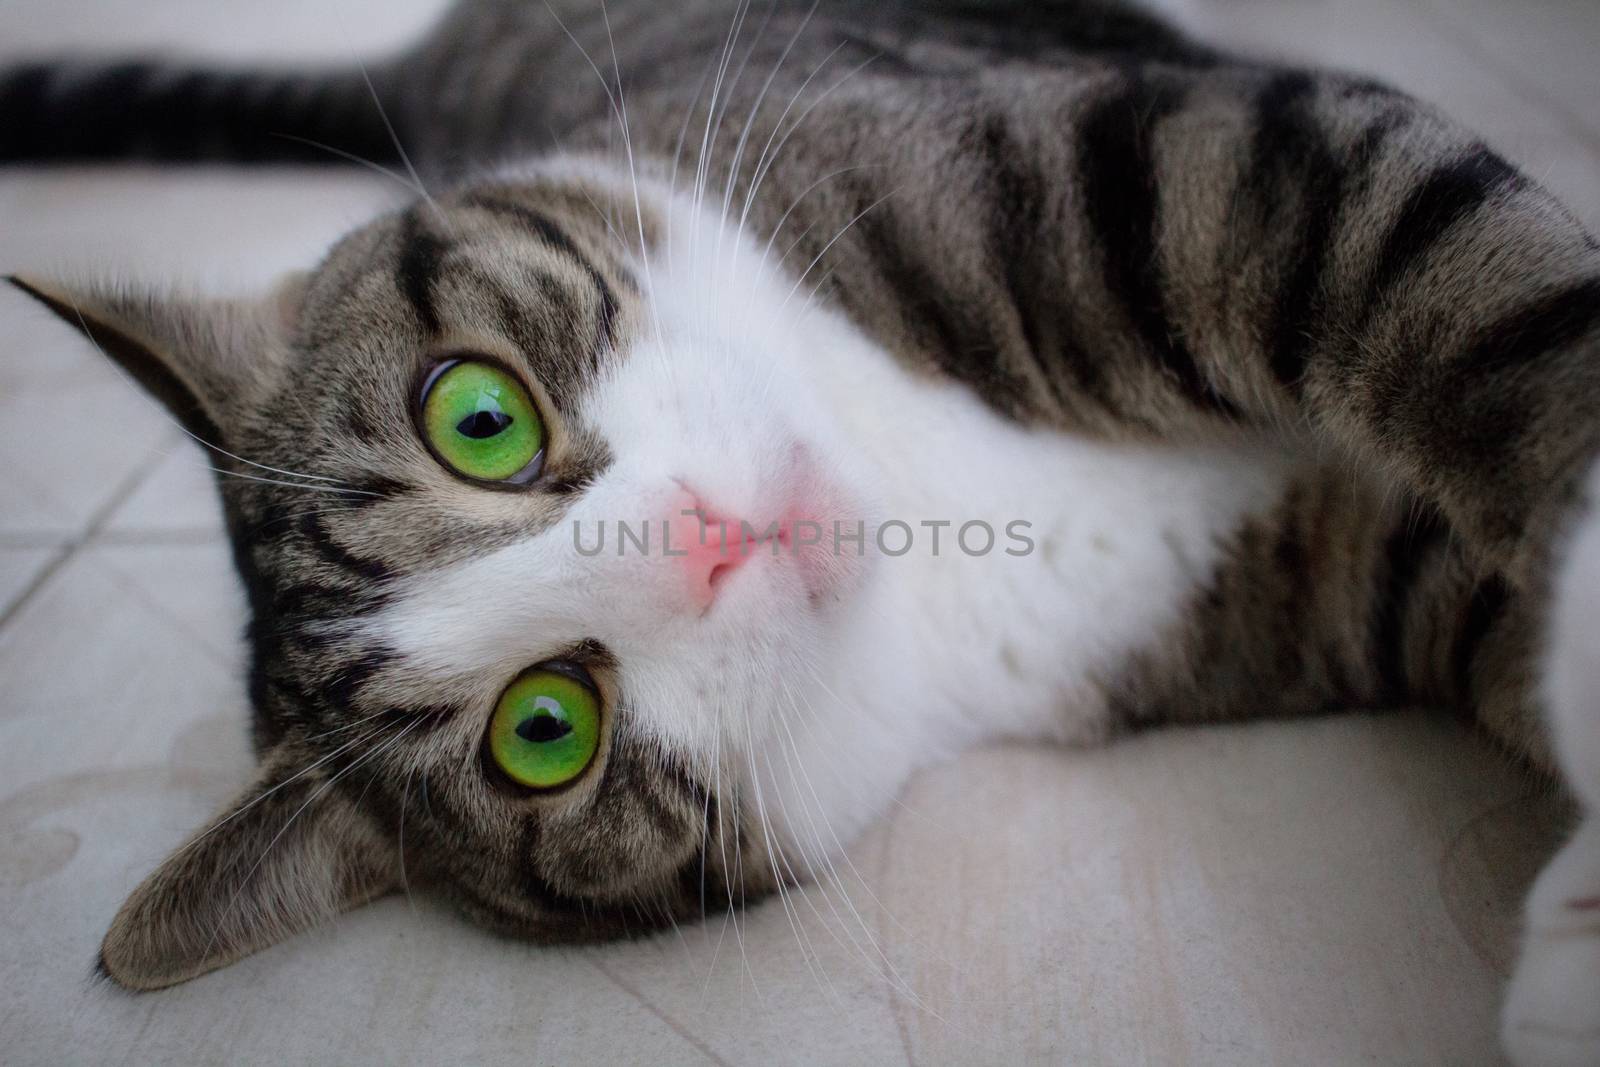 Close-up of domestic pet cat with bright green eyes lying on floor posing and playing